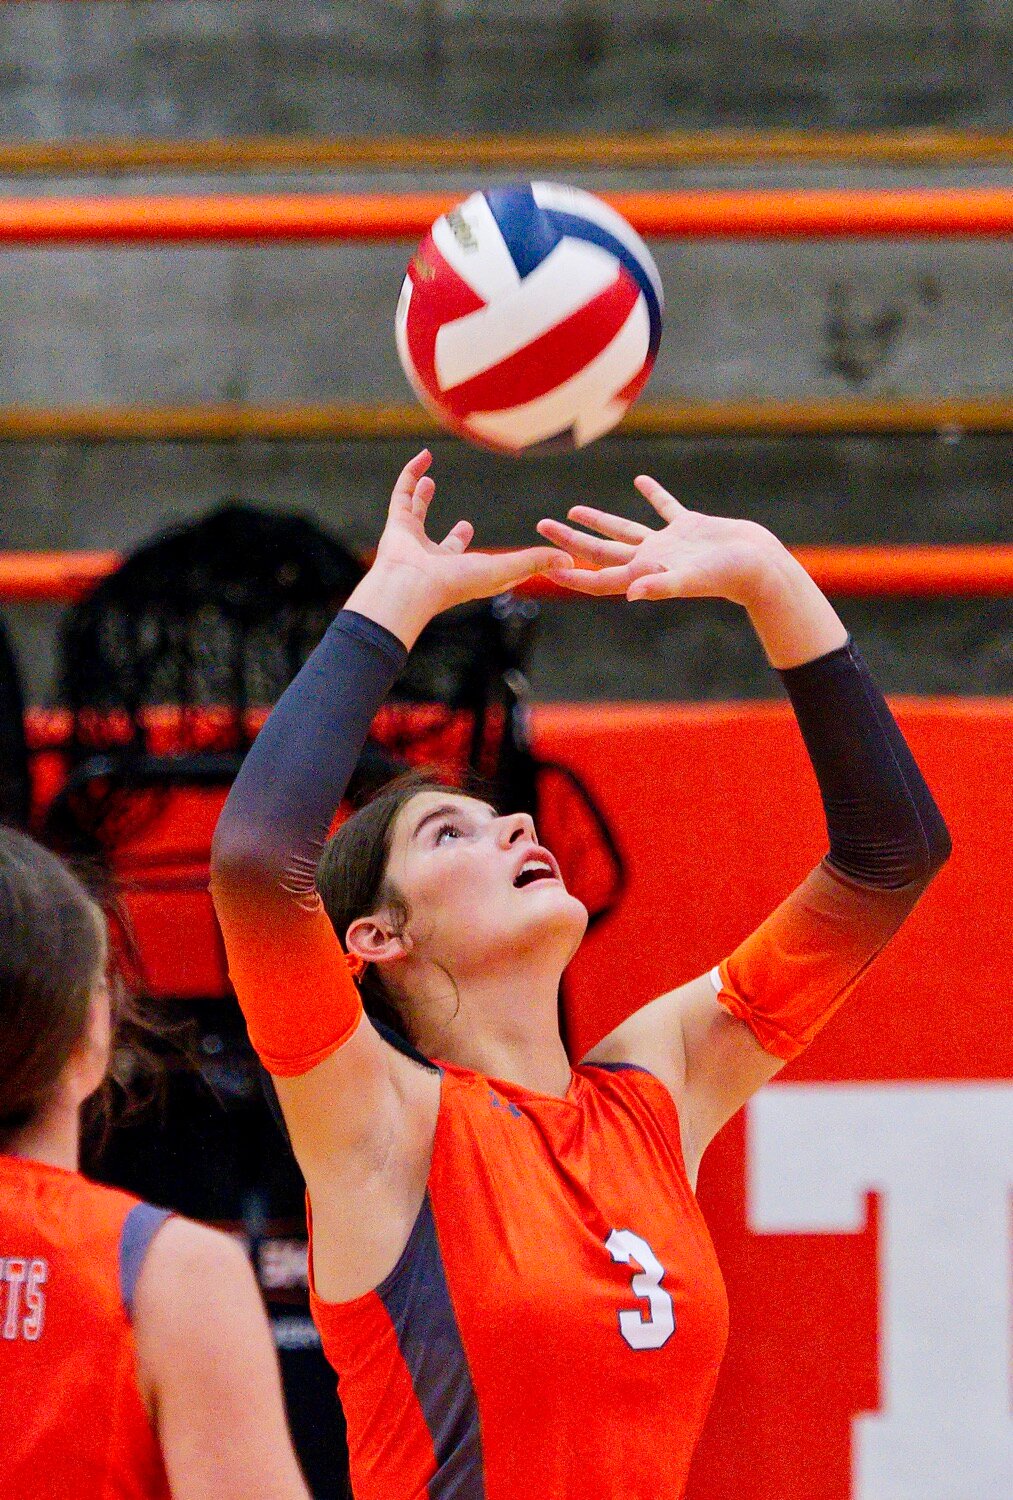 McMahon tallied 62 assists, most after moving into the second setter position following a Trinadee Jackson leg injury. This set was made Aug. 22 while hosting Grand Saline. [more McMahon in motion]